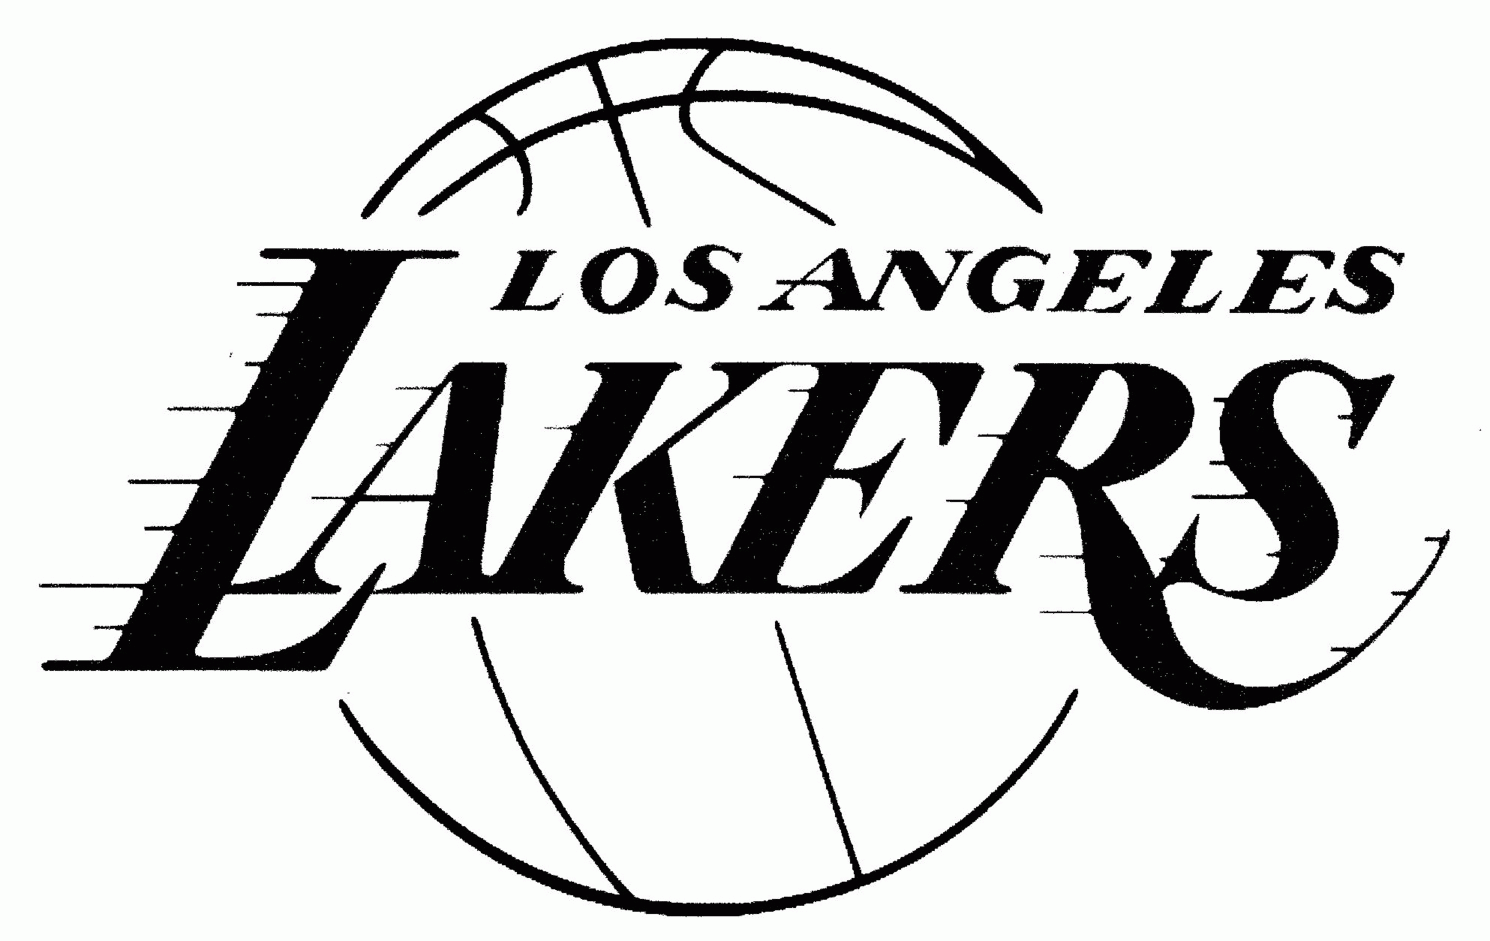 Download or print this amazing coloring page lakers